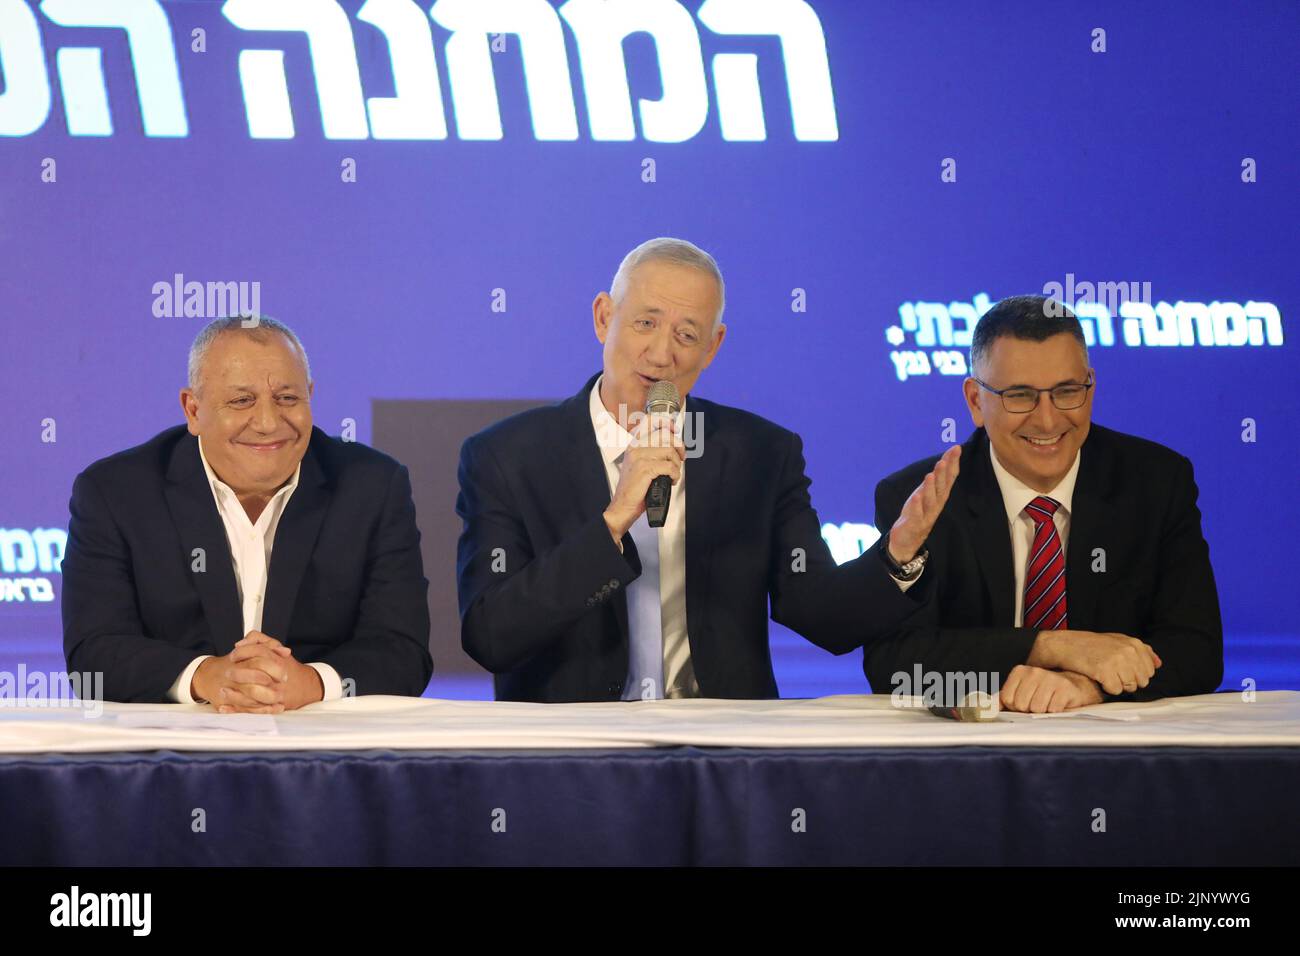 (220814) -- RAMAT GAN, Aug. 14, 2022 (Xinhua) -- Benny Gantz (C), Israel's defense minister and leader of the centrist alliance Blue and White, and Gideon Sa'ar (R), the justice minister and leader of the right-wing New Hope party, and former Israeli military chief Gadi Eisenkot attend a joint press conference in Ramat Gan, Israel, on Aug. 14, 2022. The former Israeli military chief Gadi Eisenkot announced on Sunday that he has joined the alliance of two government ministers to run for the November parliamentary elections. The new three-way alliance will be headed by Gantz, with Sa'ar as his s Stock Photo